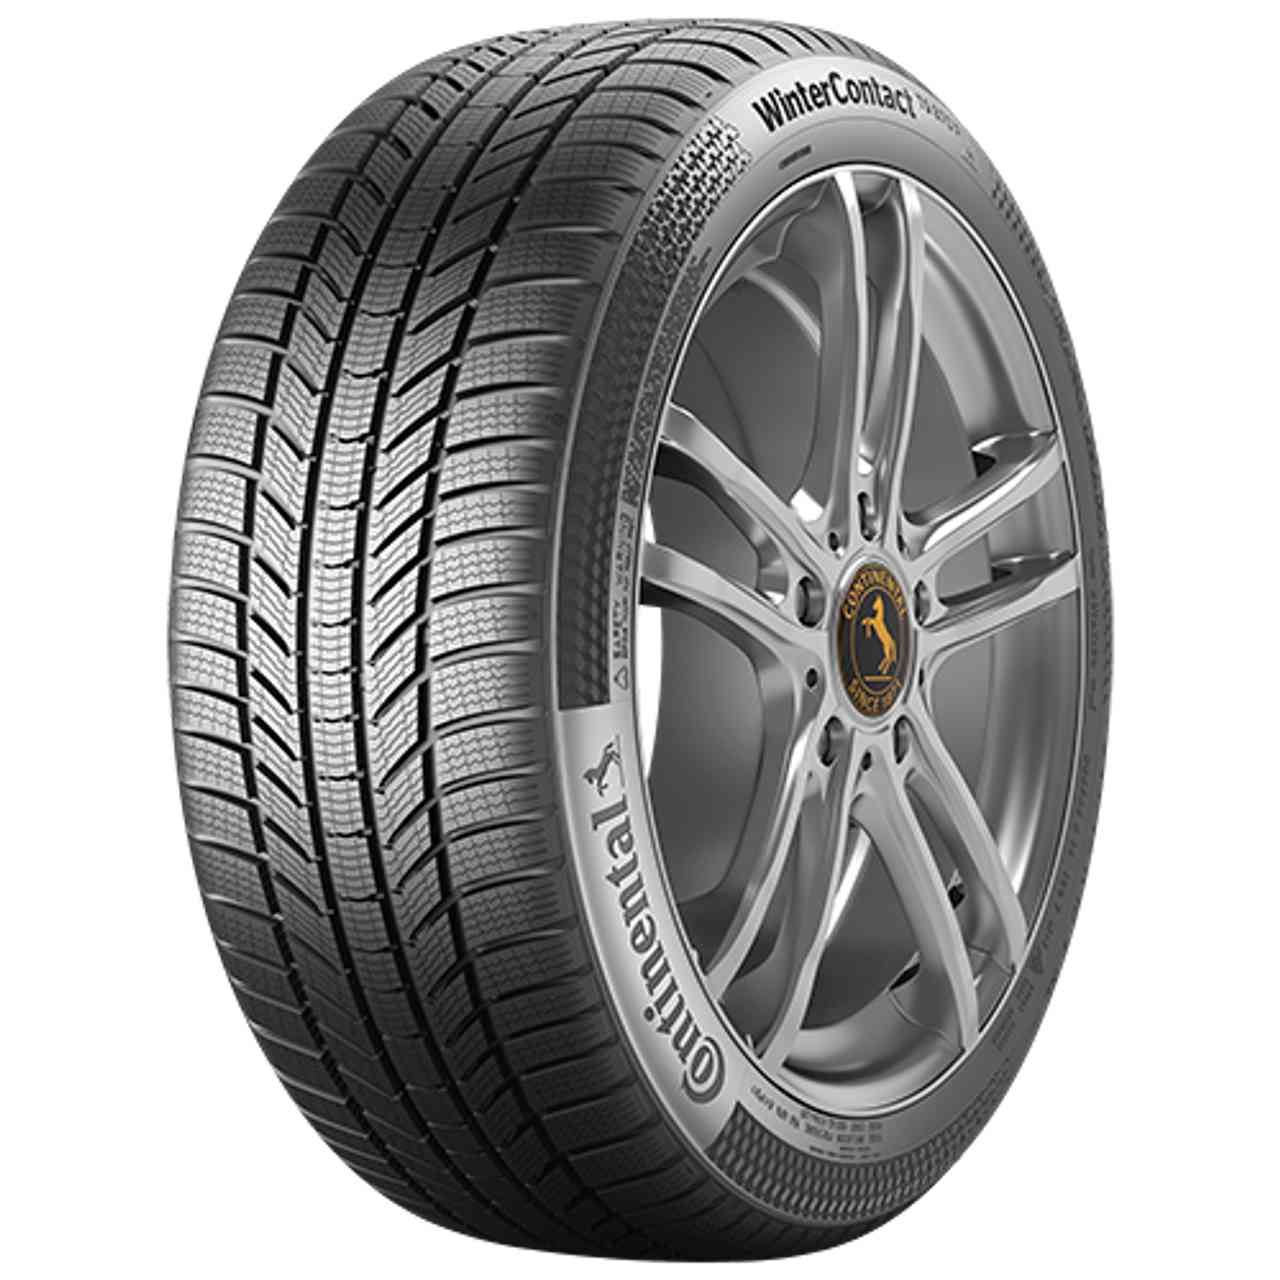 CONTINENTAL WINTERCONTACT TS 870 P (EVc) 235/55R20 105V FR BSW